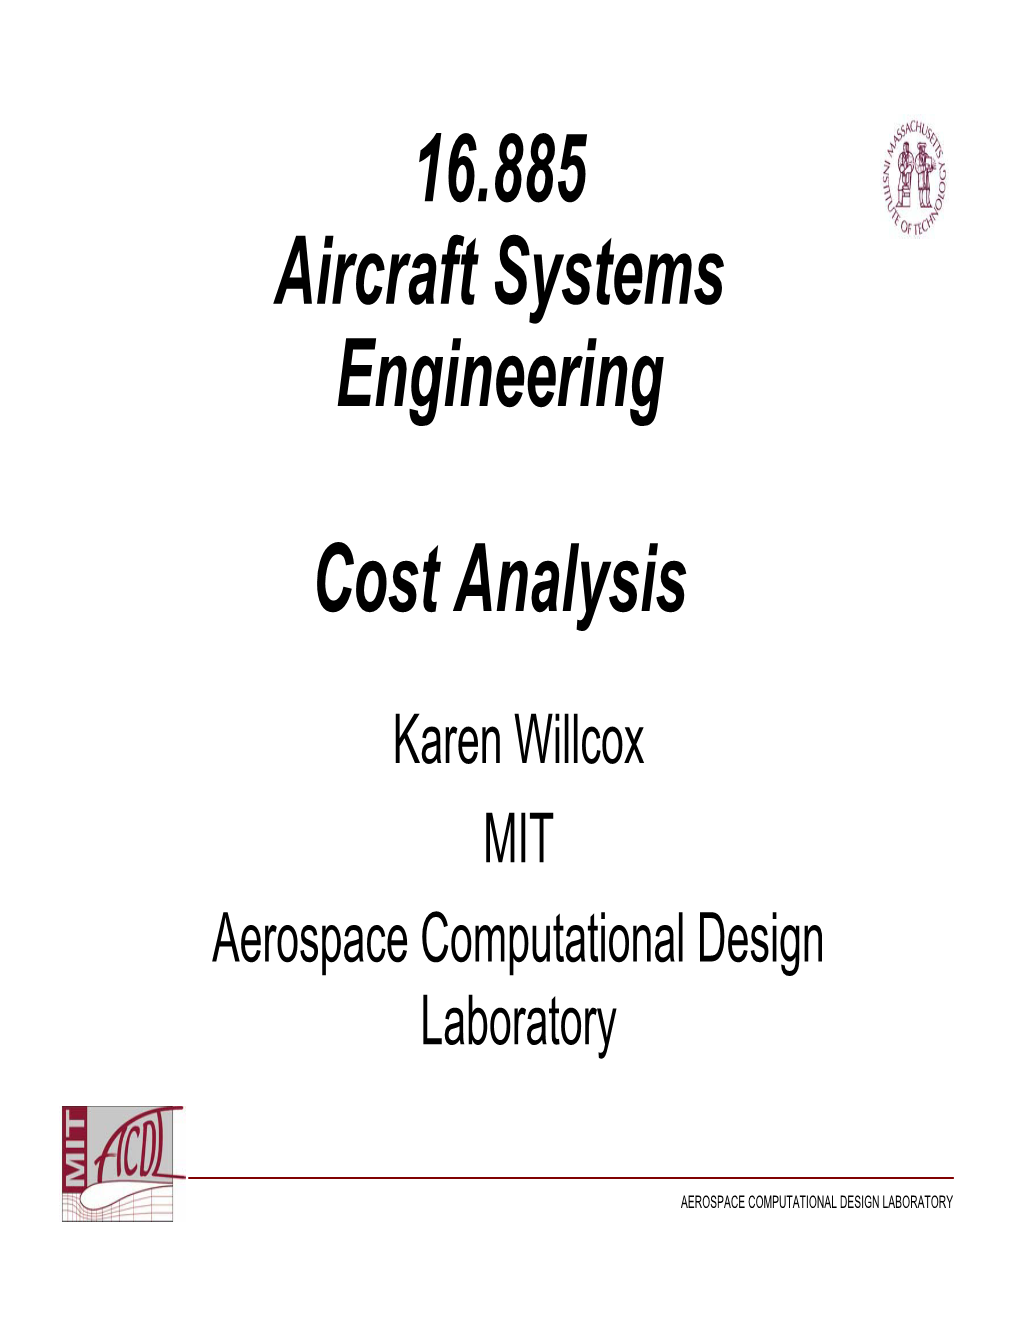 16.885 Aircraft Systems Engineering Cost Analysis